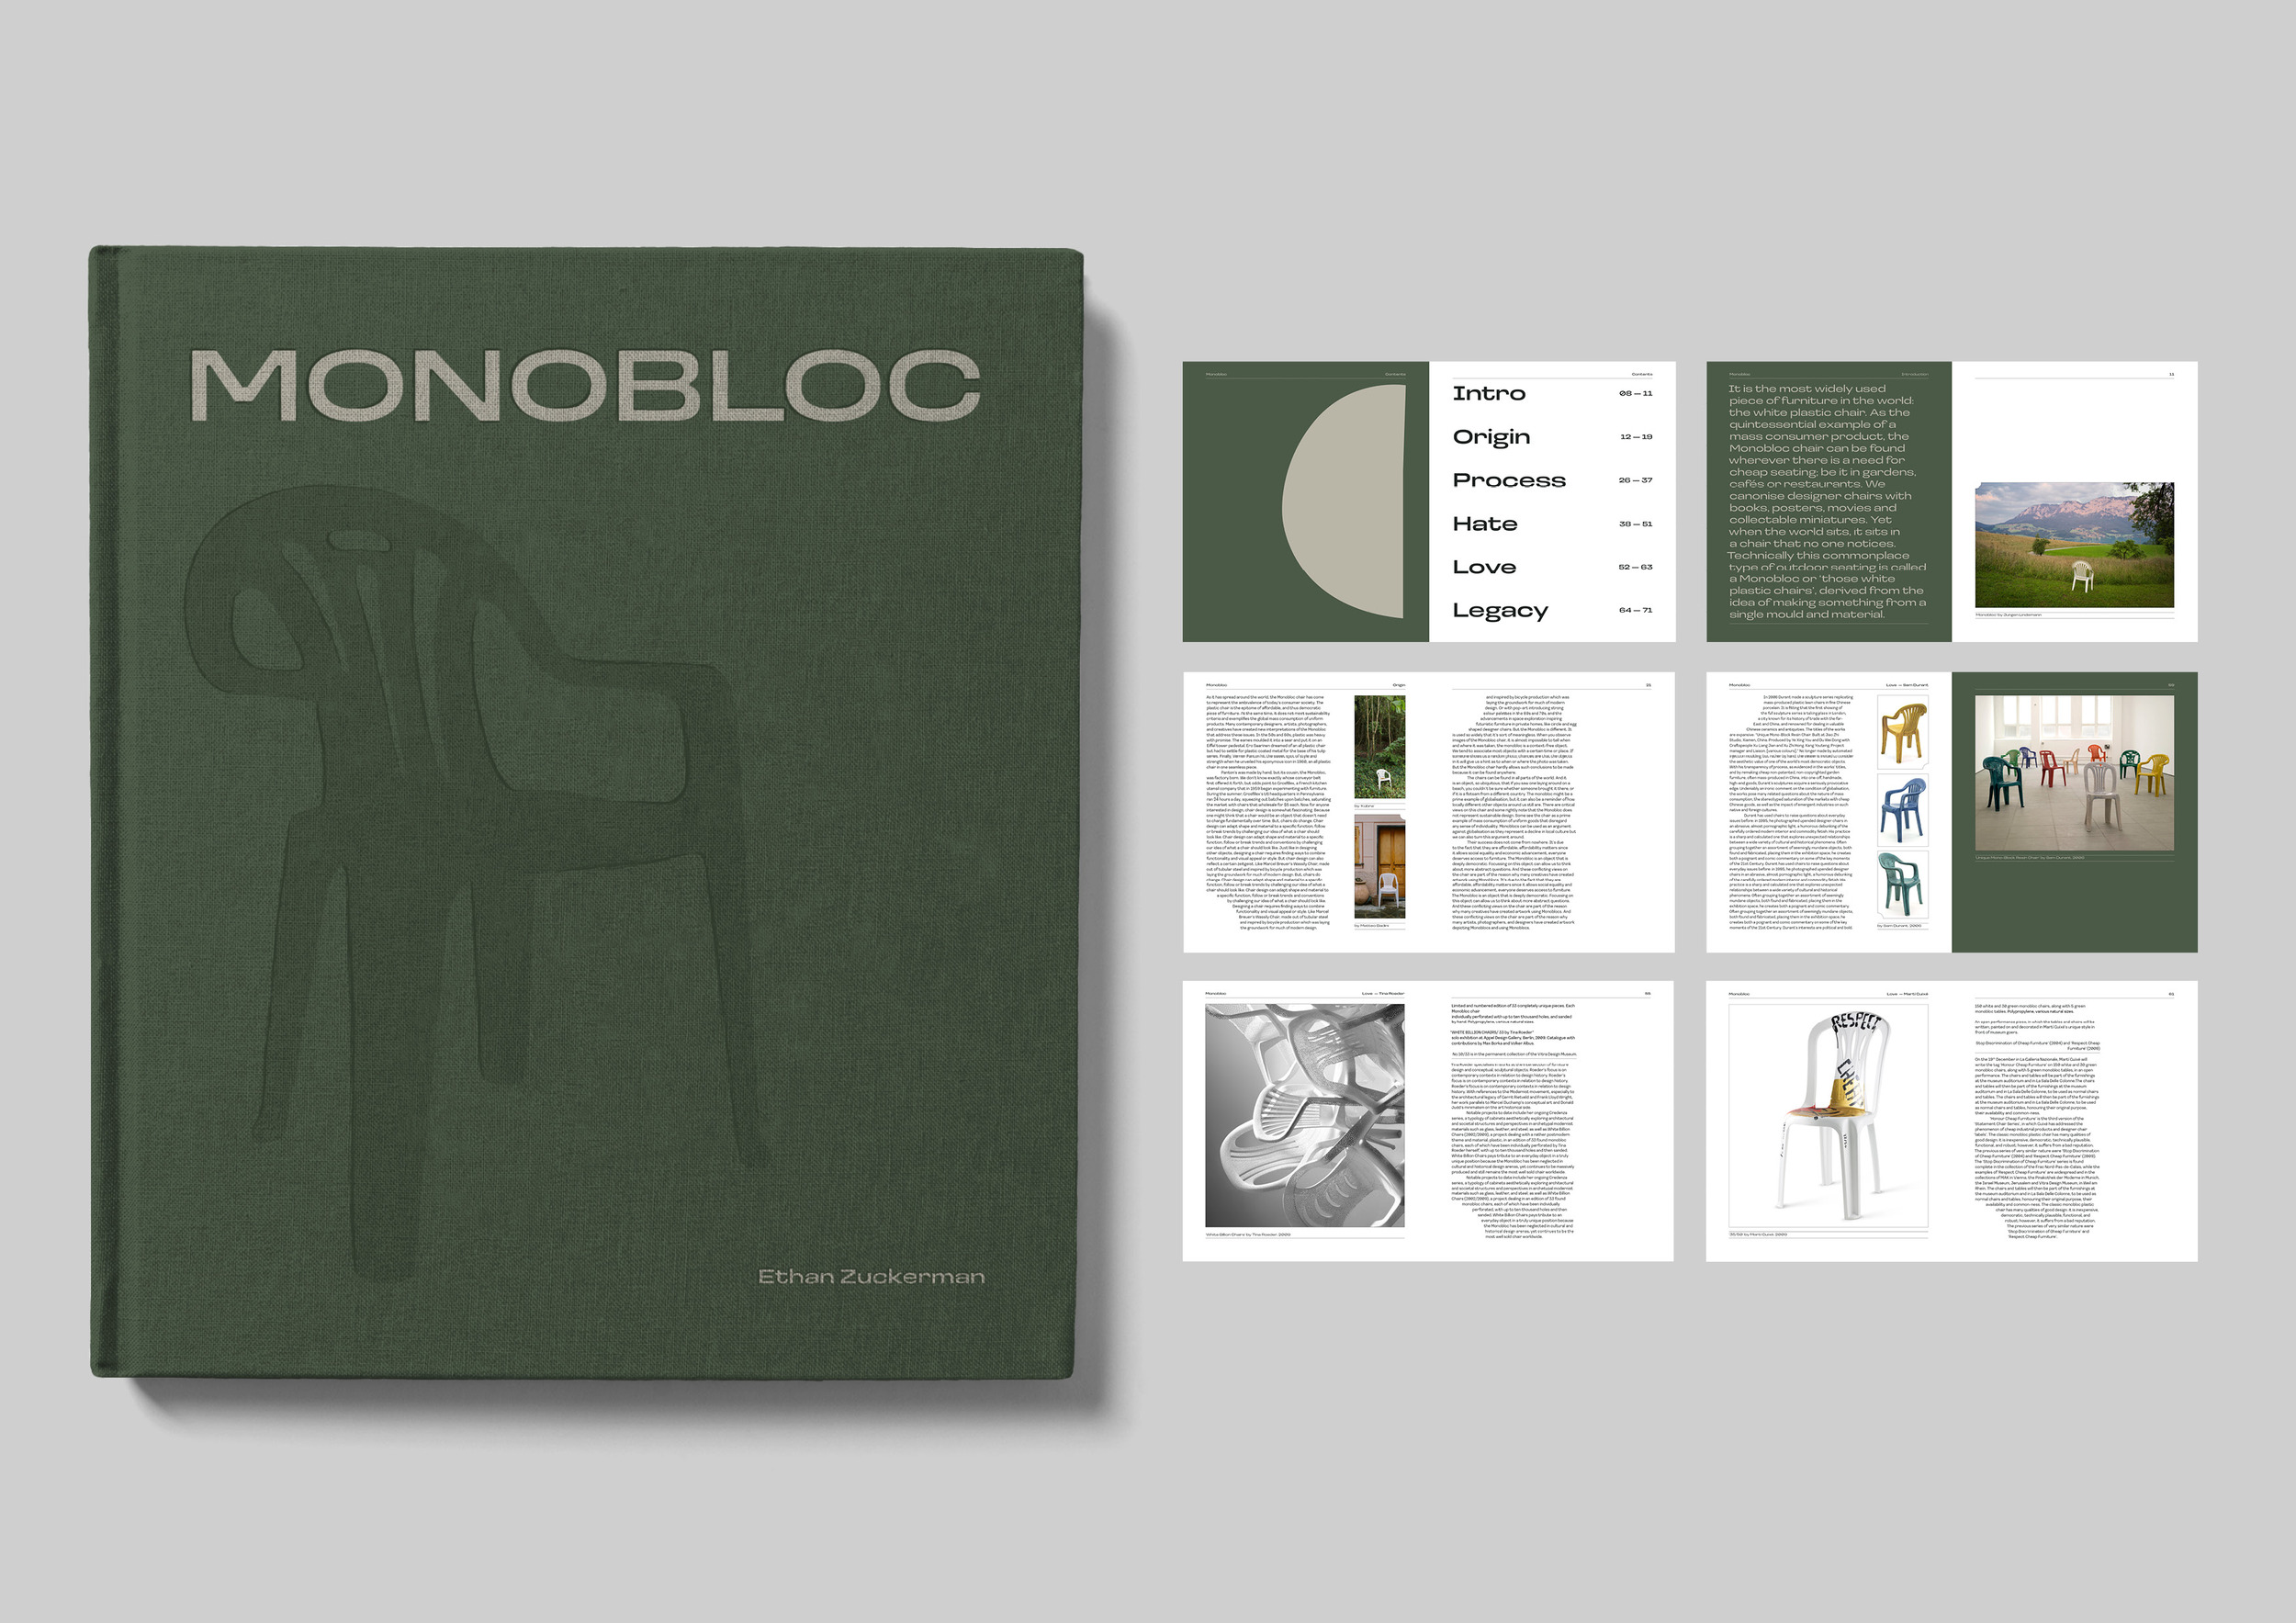 Book layout and cover design by Harriett Smith about and inspired by the Monobloc chair.